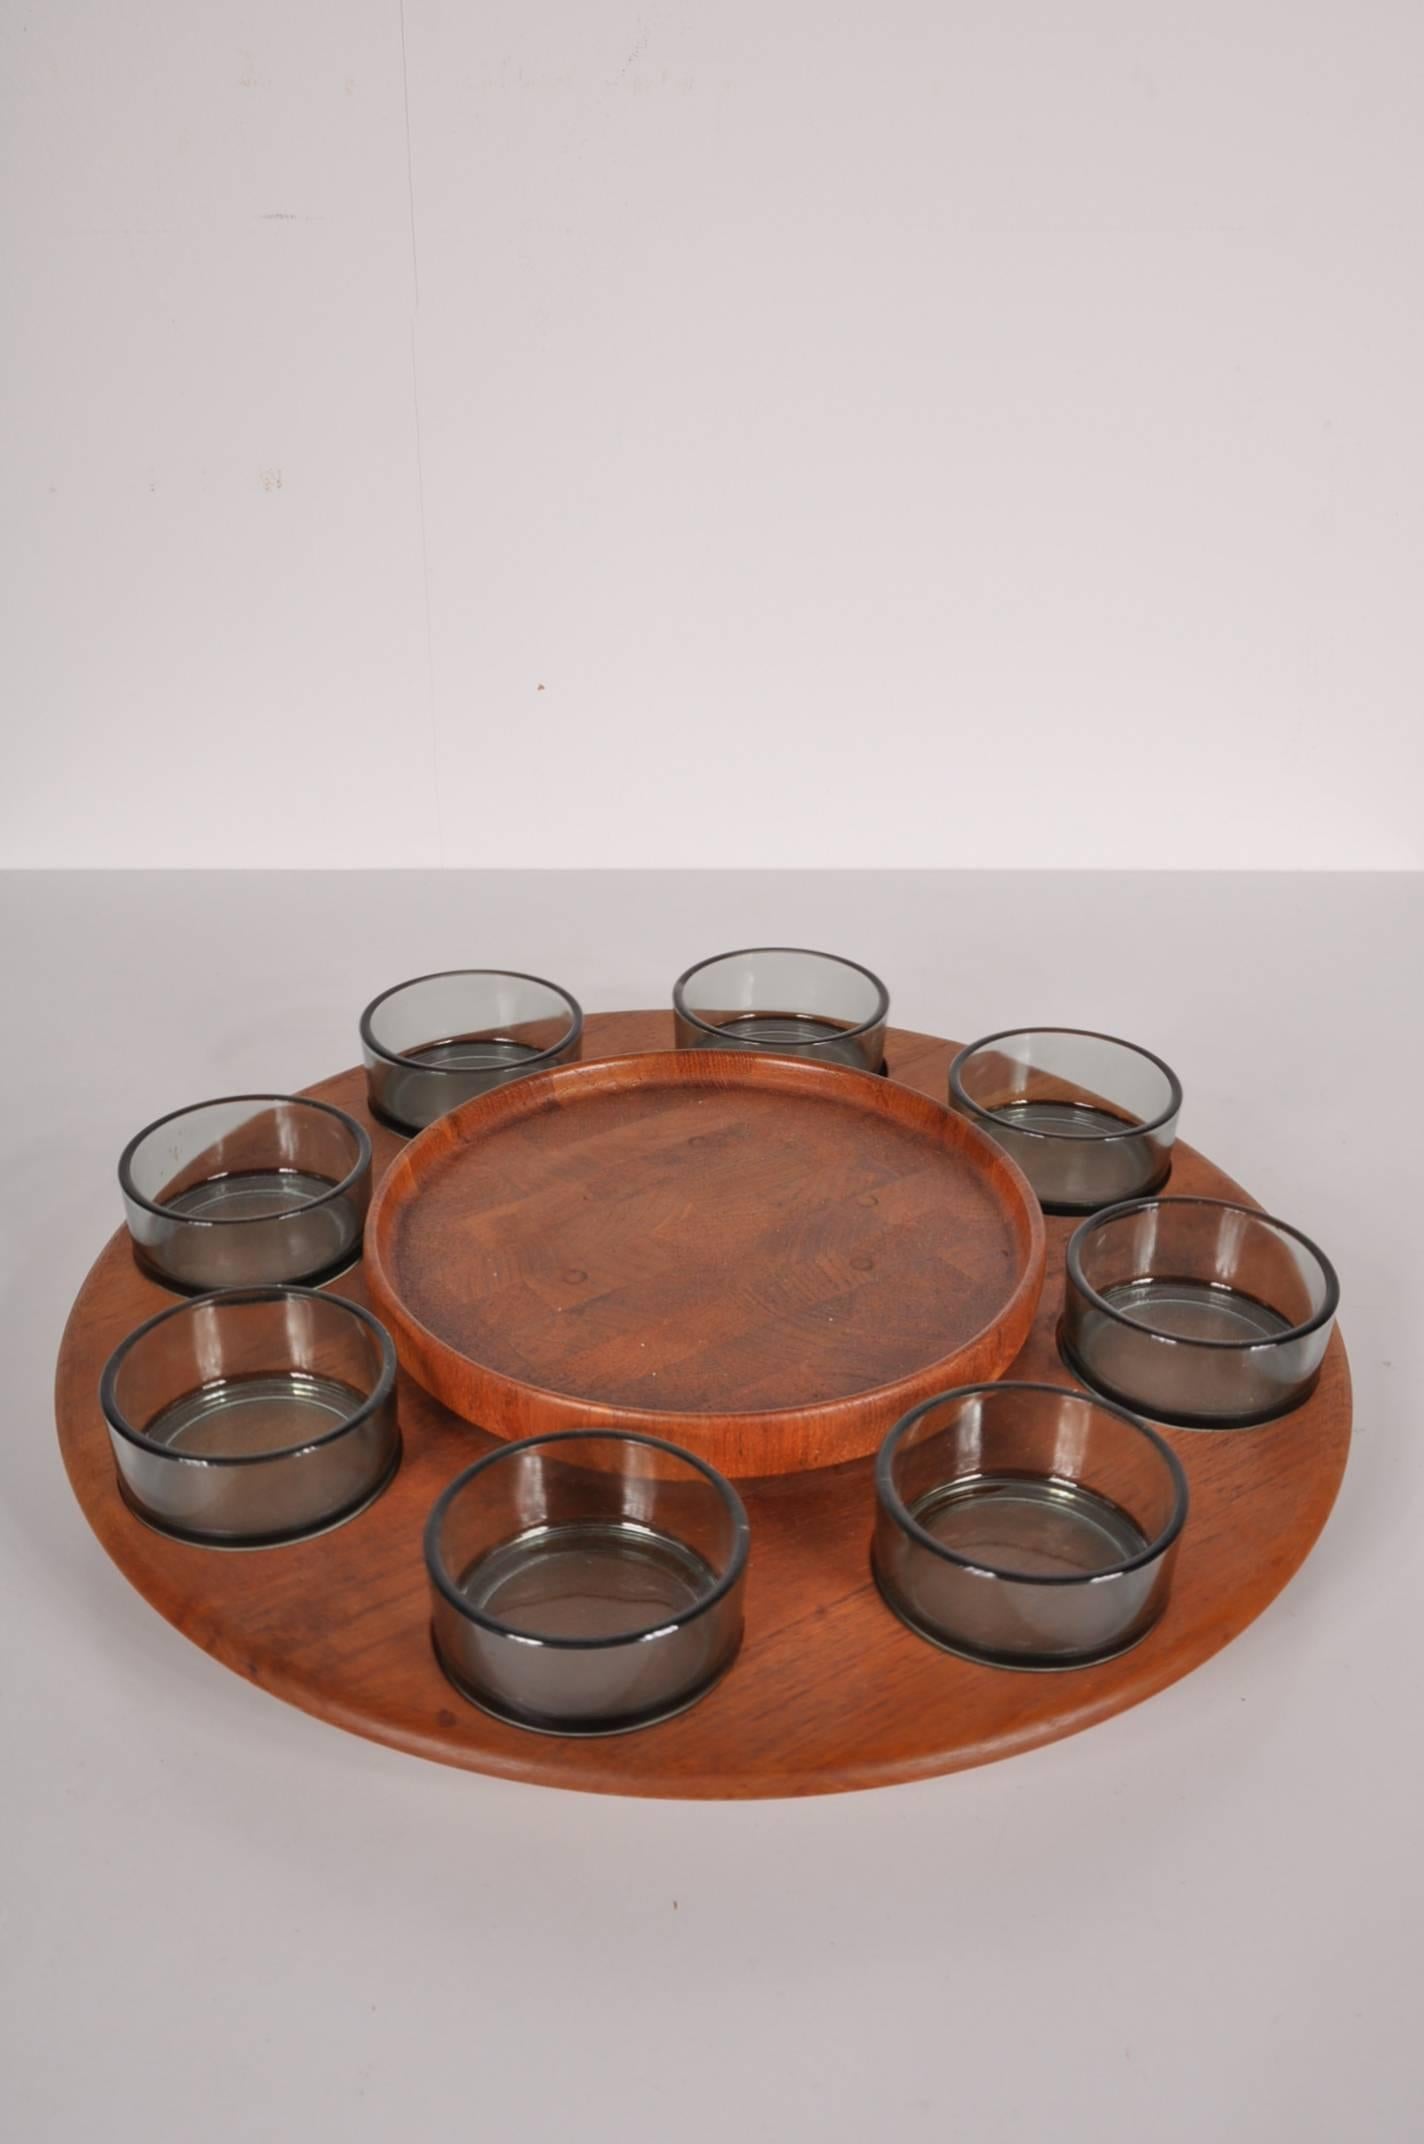 Danish Carousel Serving Tray by Digsmed Denmark, circa 1950